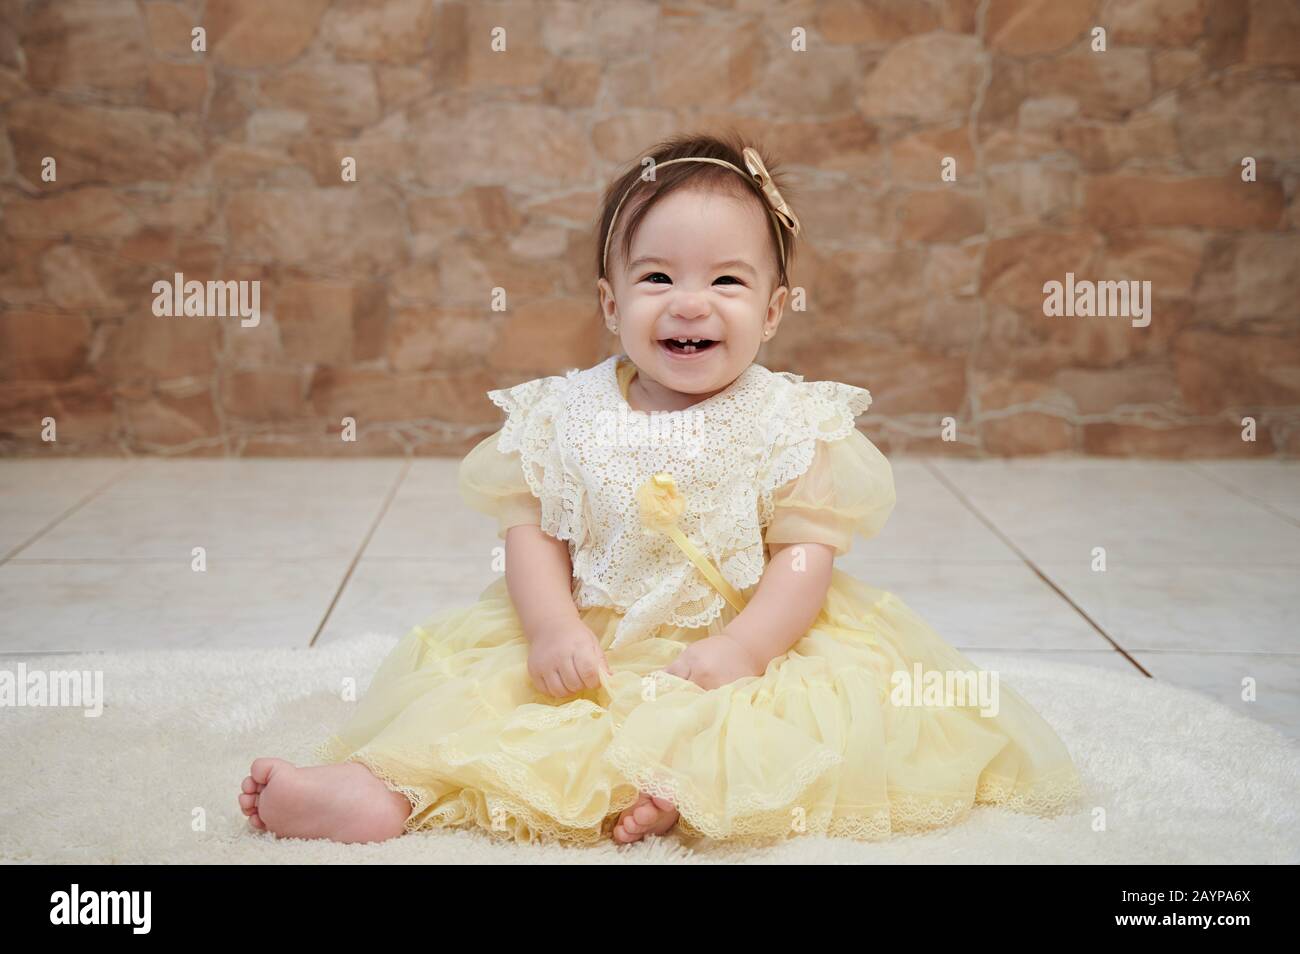 Happy smiling cute baby girl sit on floor in yellow dress Stock Photo